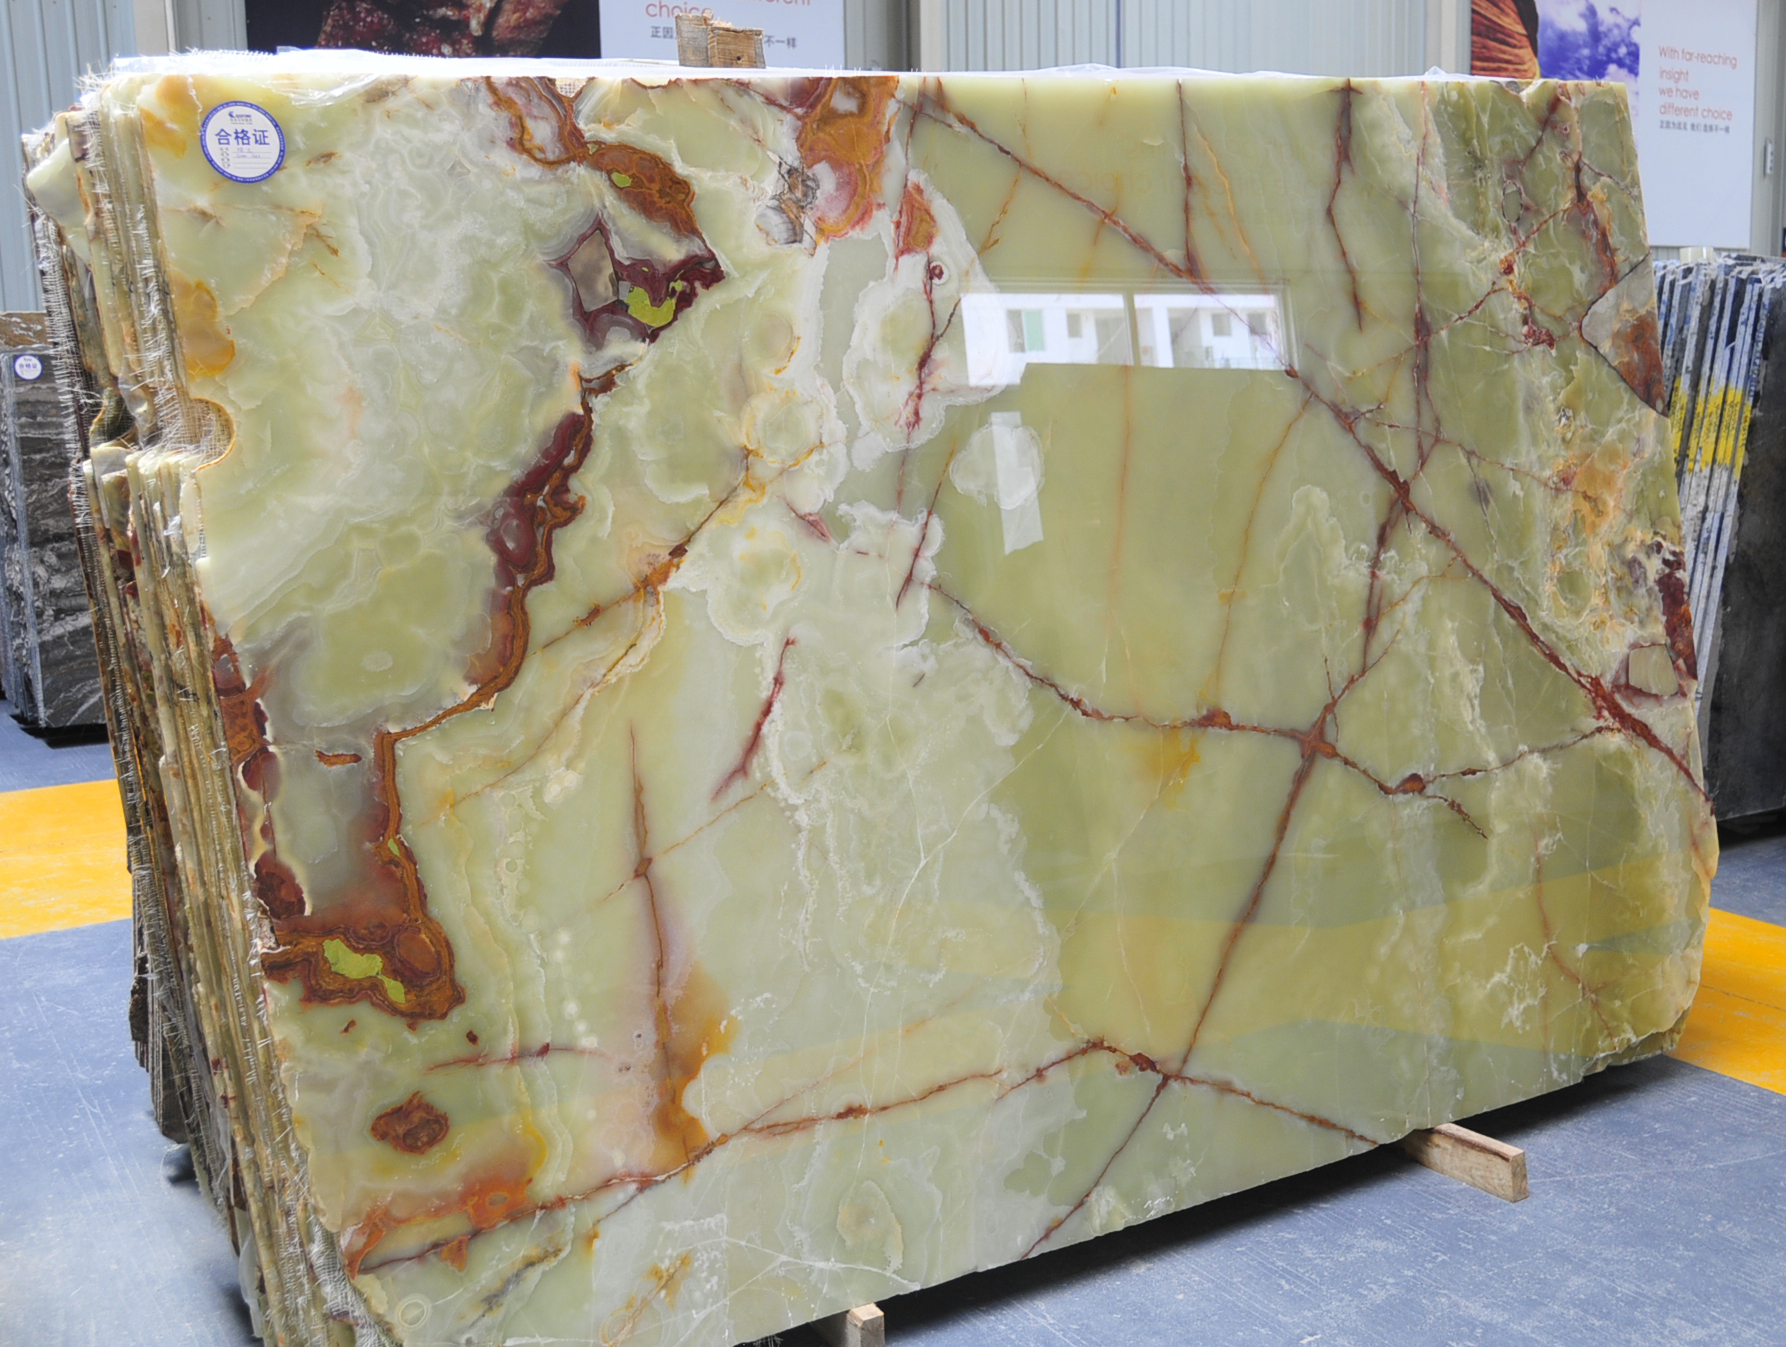 High Quality Green Onyx For Wall Use